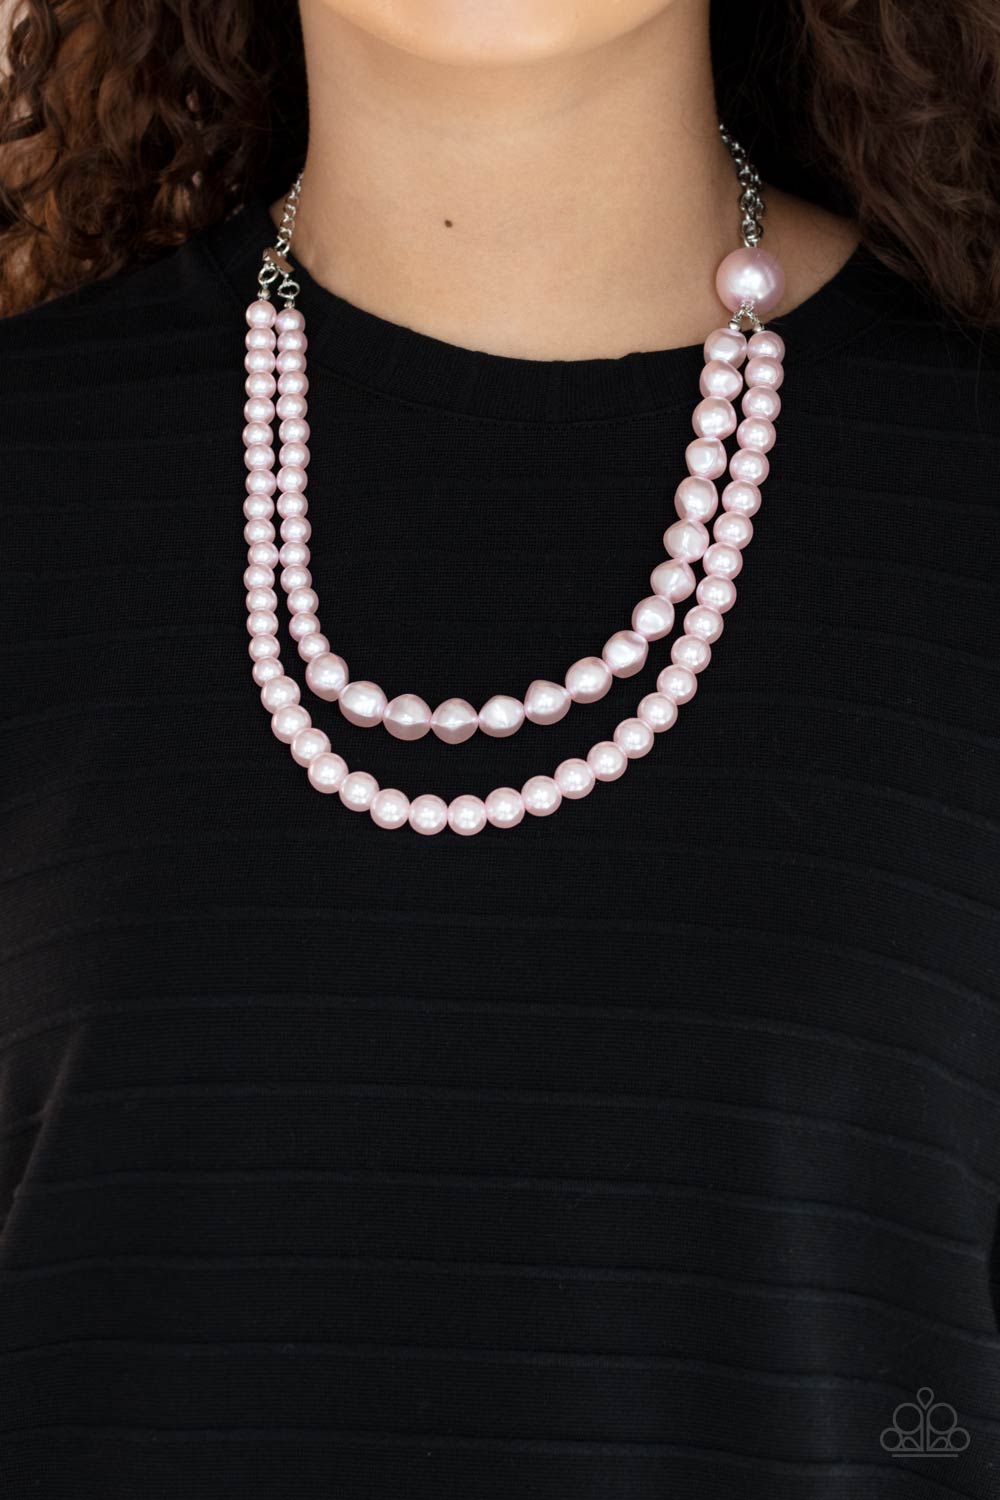 Paparazzi Necklace ~ Remarkable Radiance - Pink Pearl Necklace